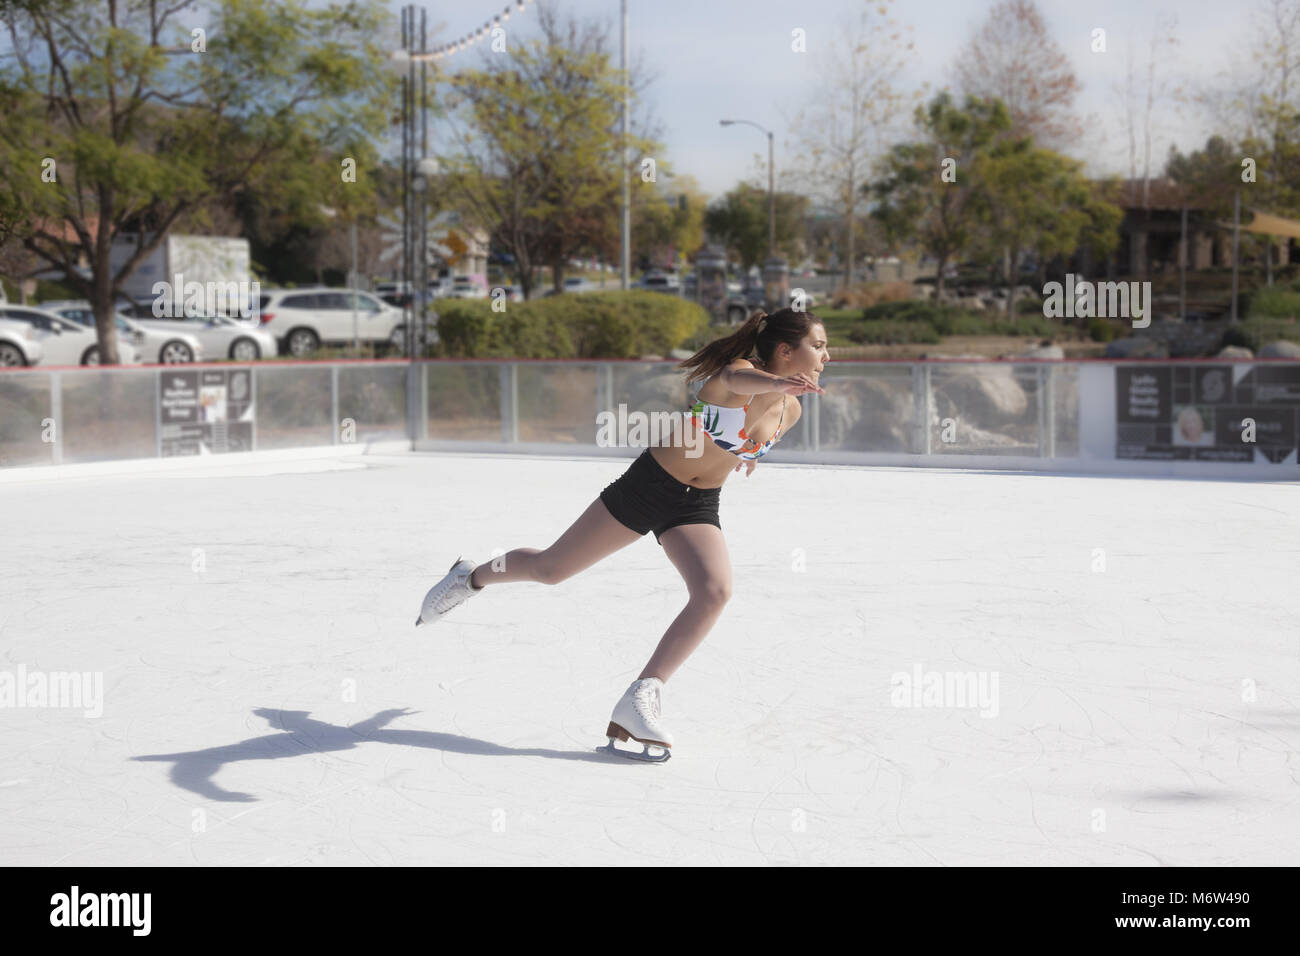 Teenage girl ice skating outdoors in shorts and a bikini top in Southern Califiornia in 85 degree winter weather Stock Photo